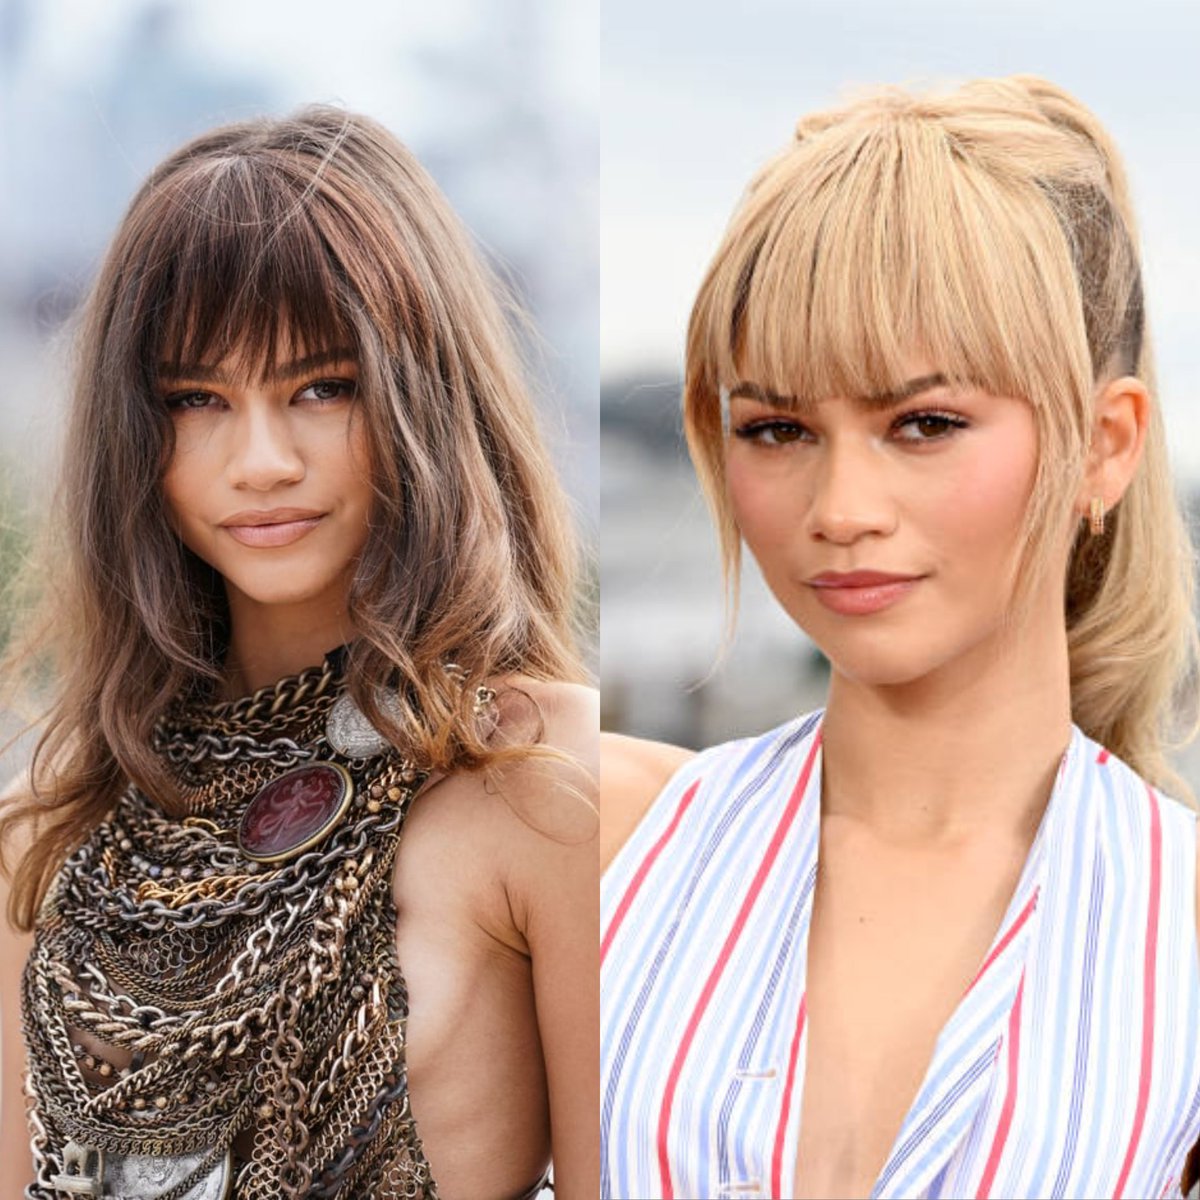 zendaya with bangs during dune part one london photocall and challengers london photocall <3